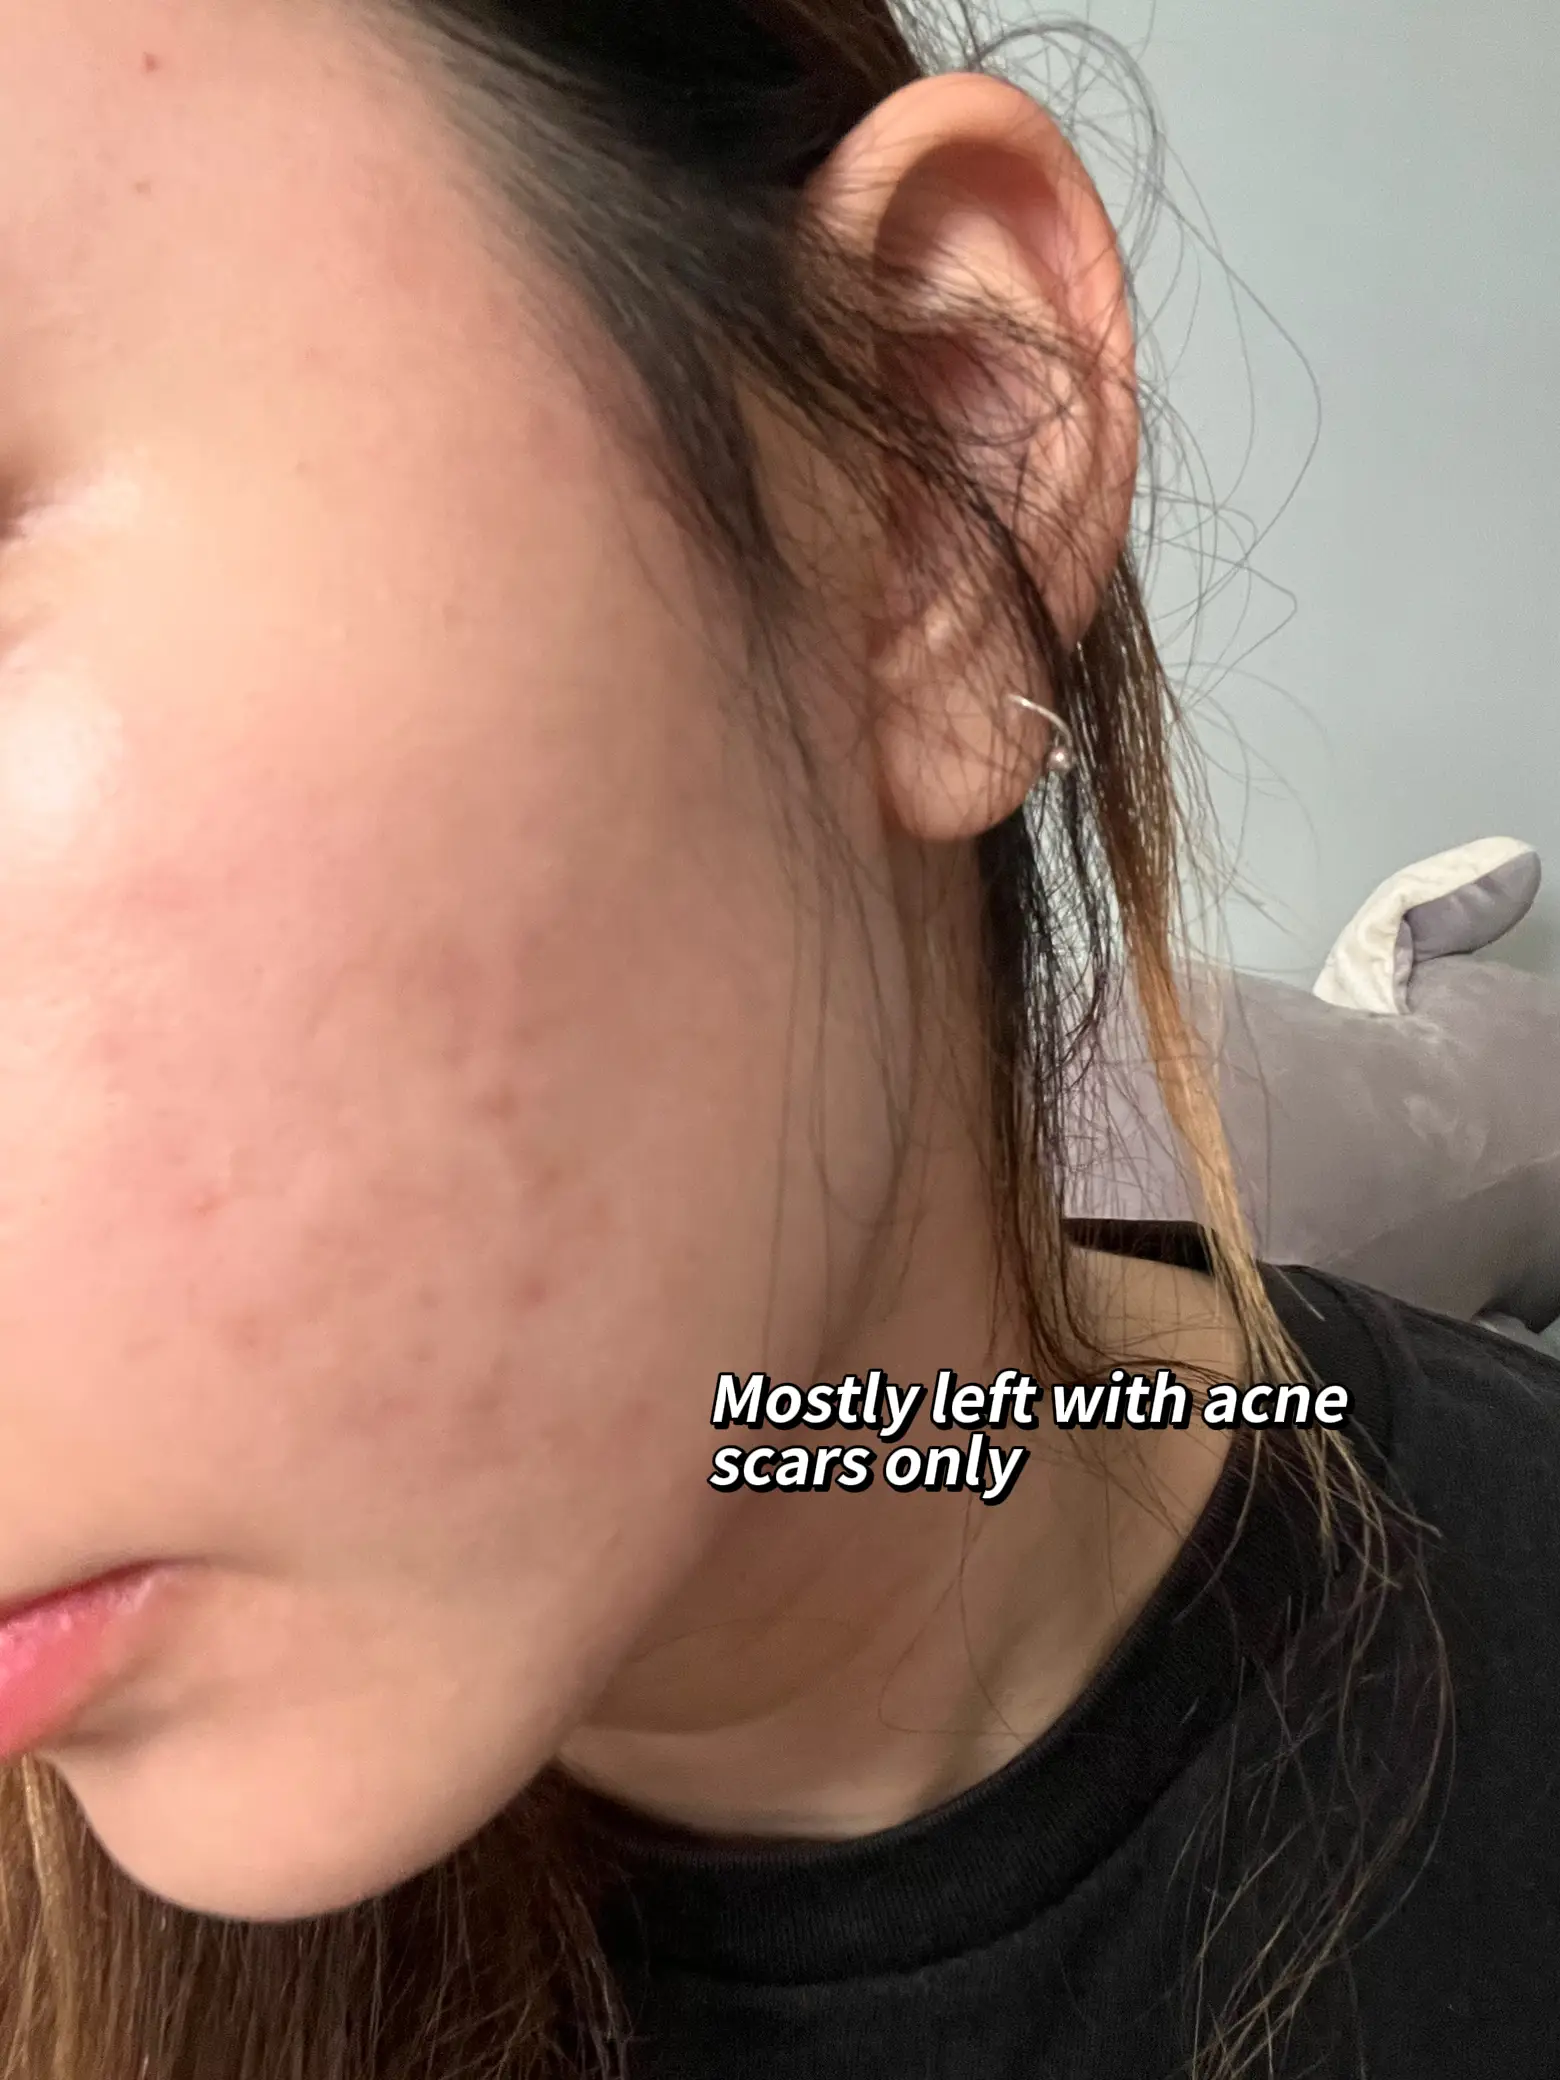 ACCUTANE DOOP THAT FINALLY CLEARED MY SEVERE ACNE🥹's images(4)